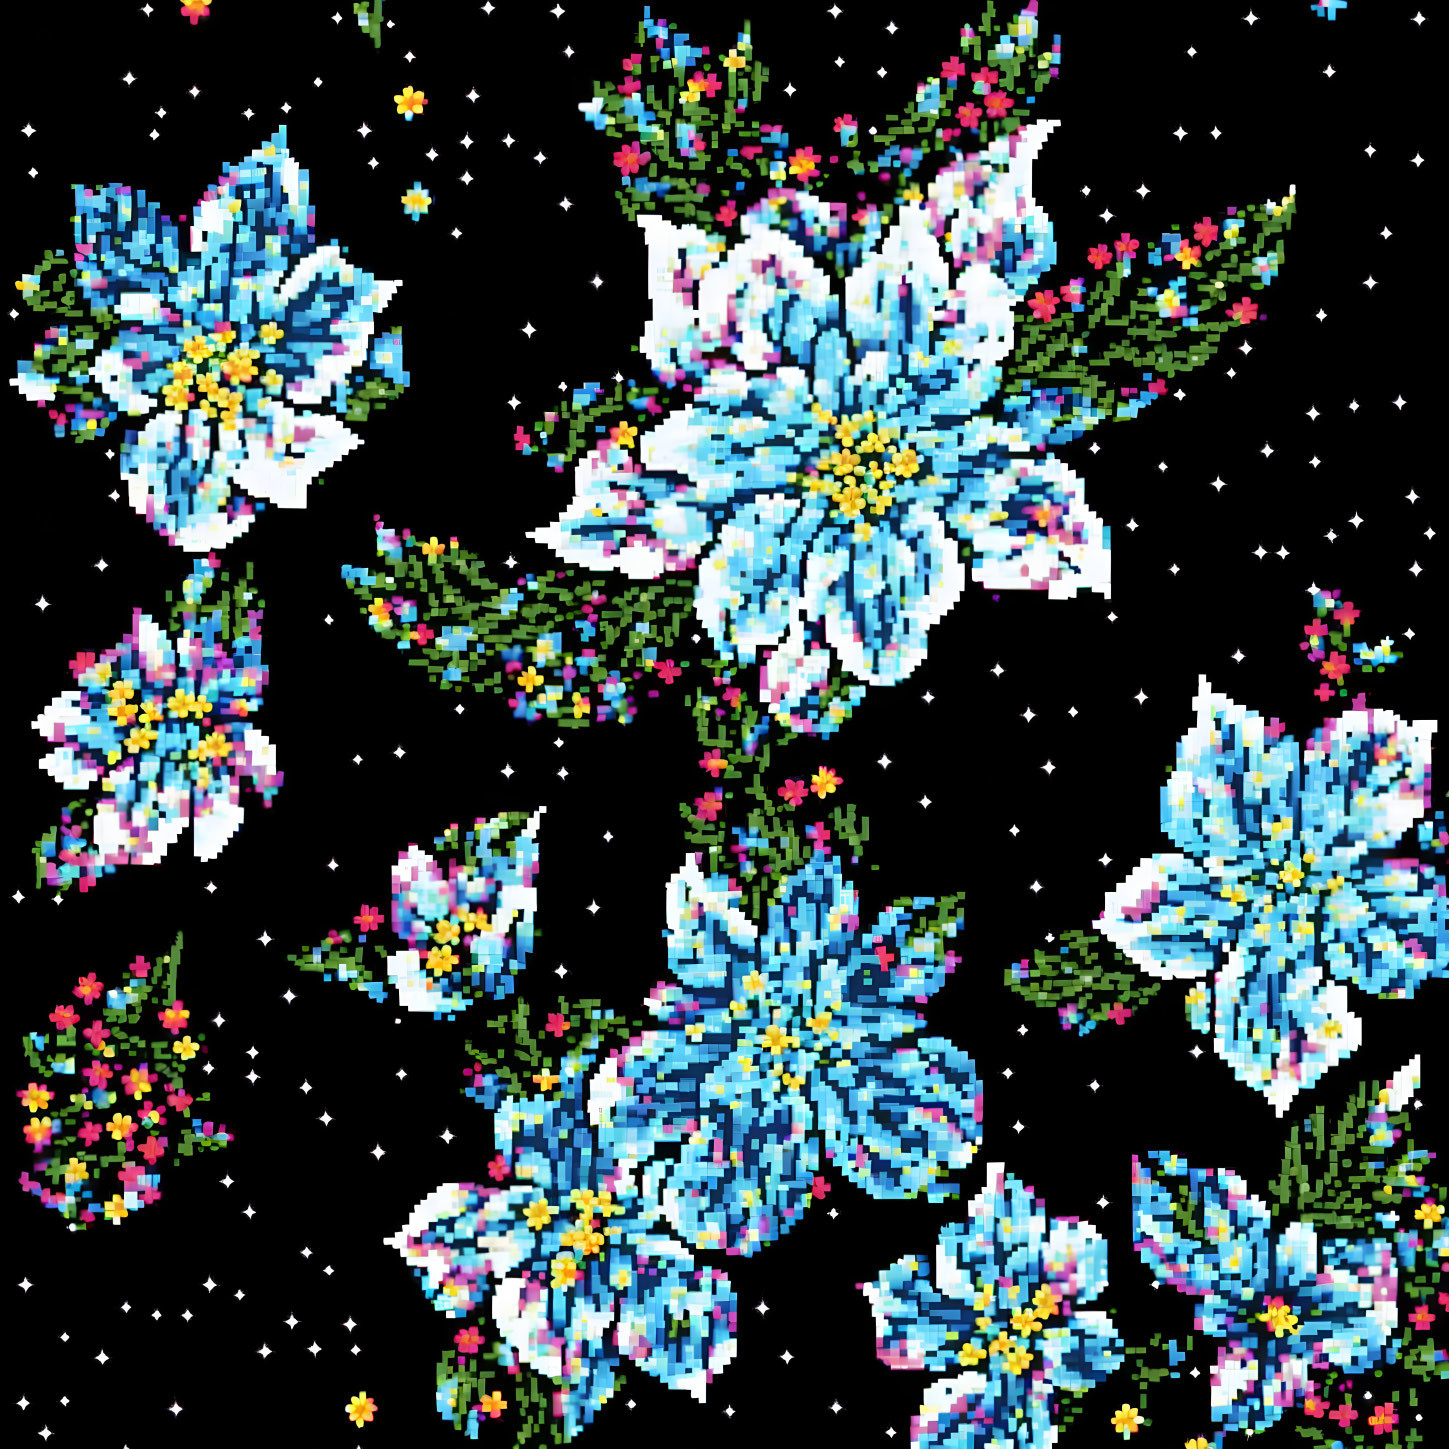 Some pixel flowers